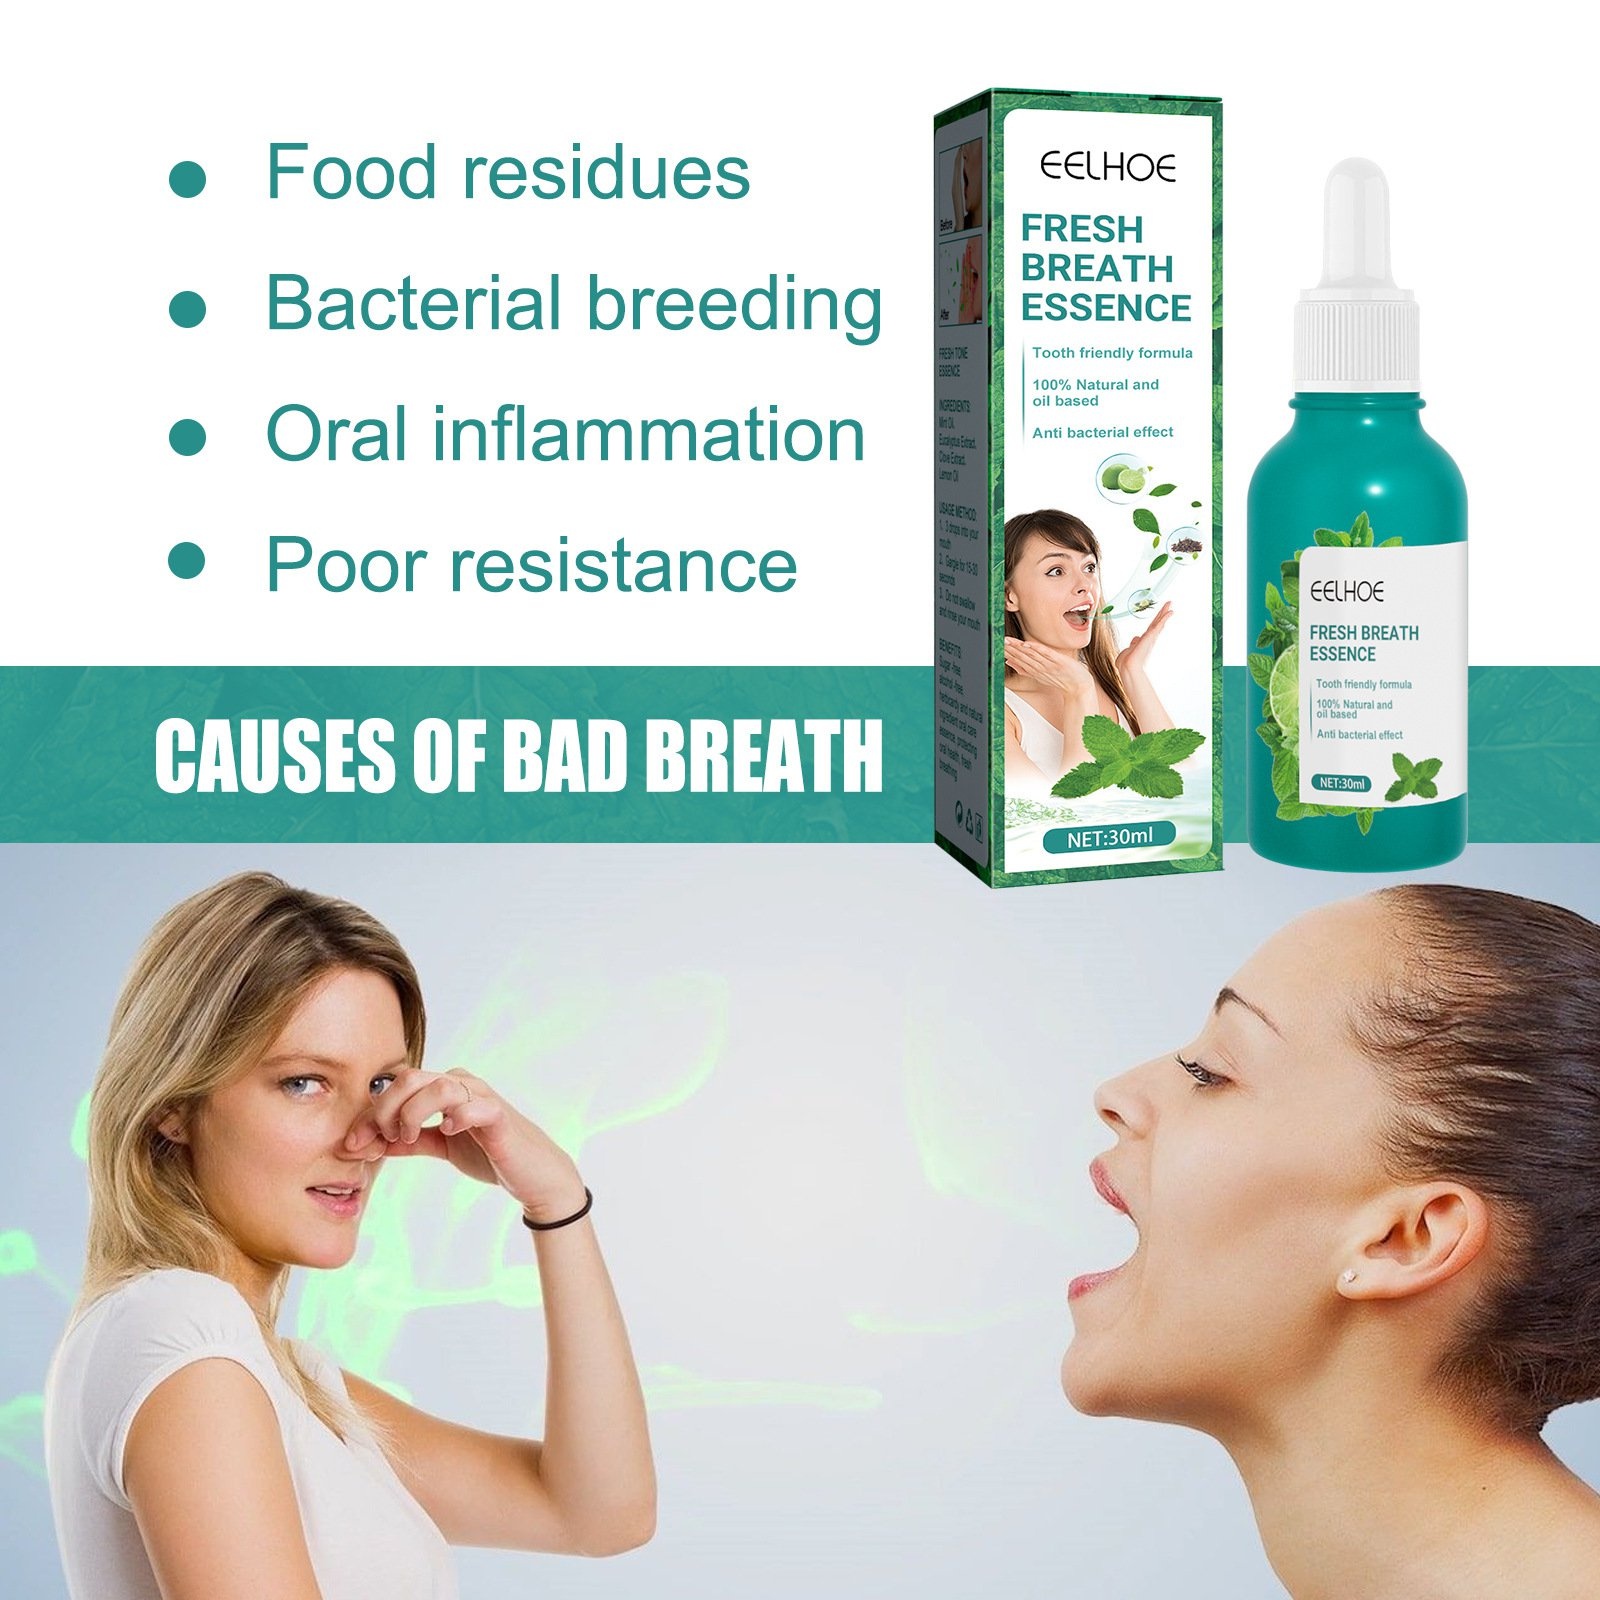 Fresh Breath Essence Mouthwash Cleanses Mouth Odor and Leaves Mint Flavor